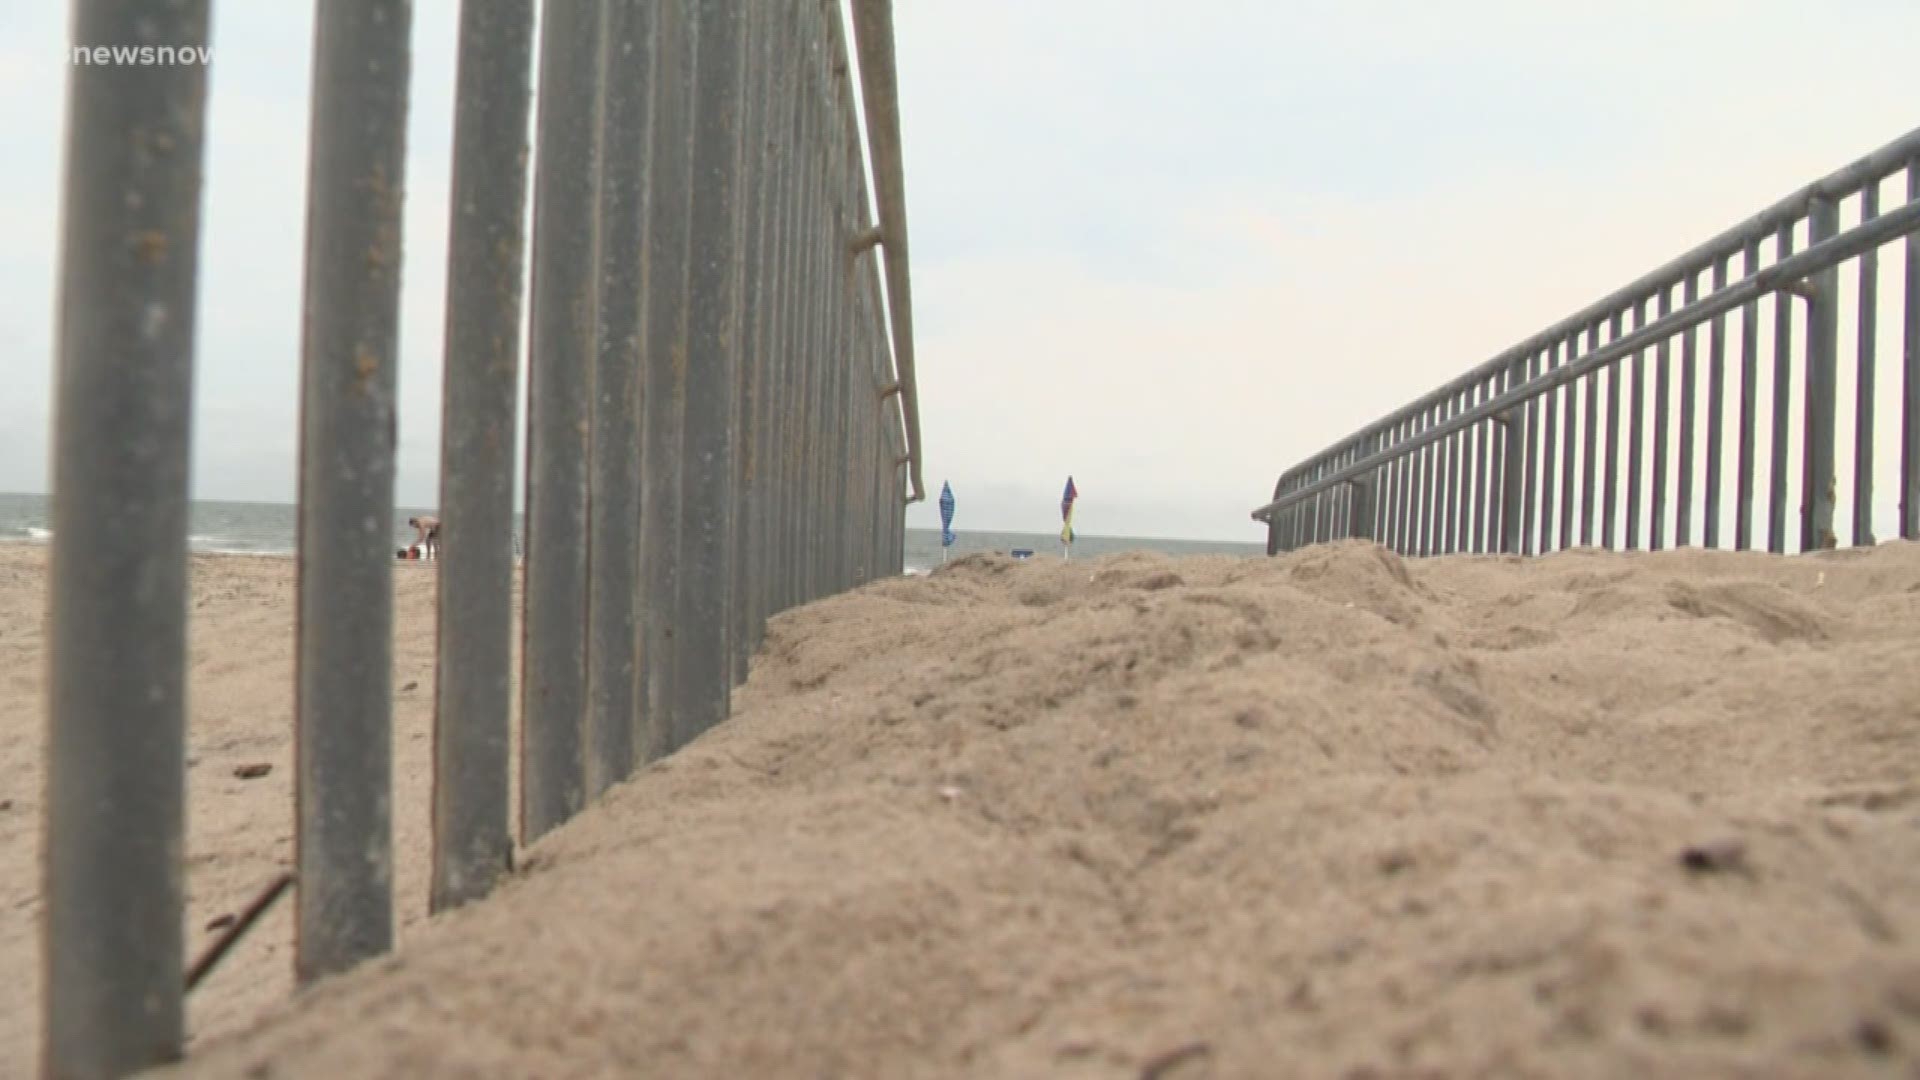 Experts said the damage could have been a lot worse. The dunes helped a lot and a new replenishment project is planned to protect the area from the next storm.